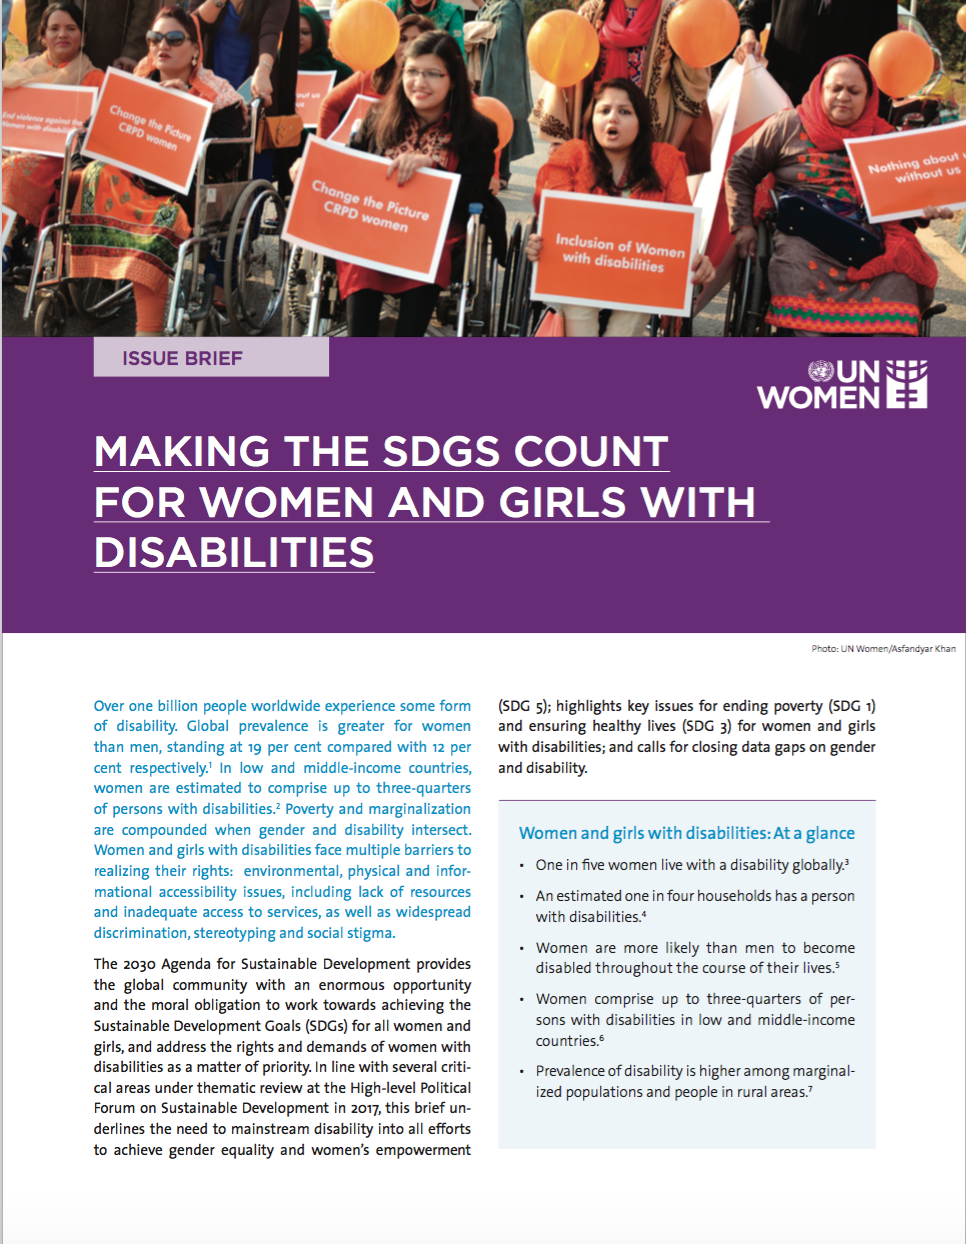 Issue brief: Making the SDGs count for women and girls with disabilities